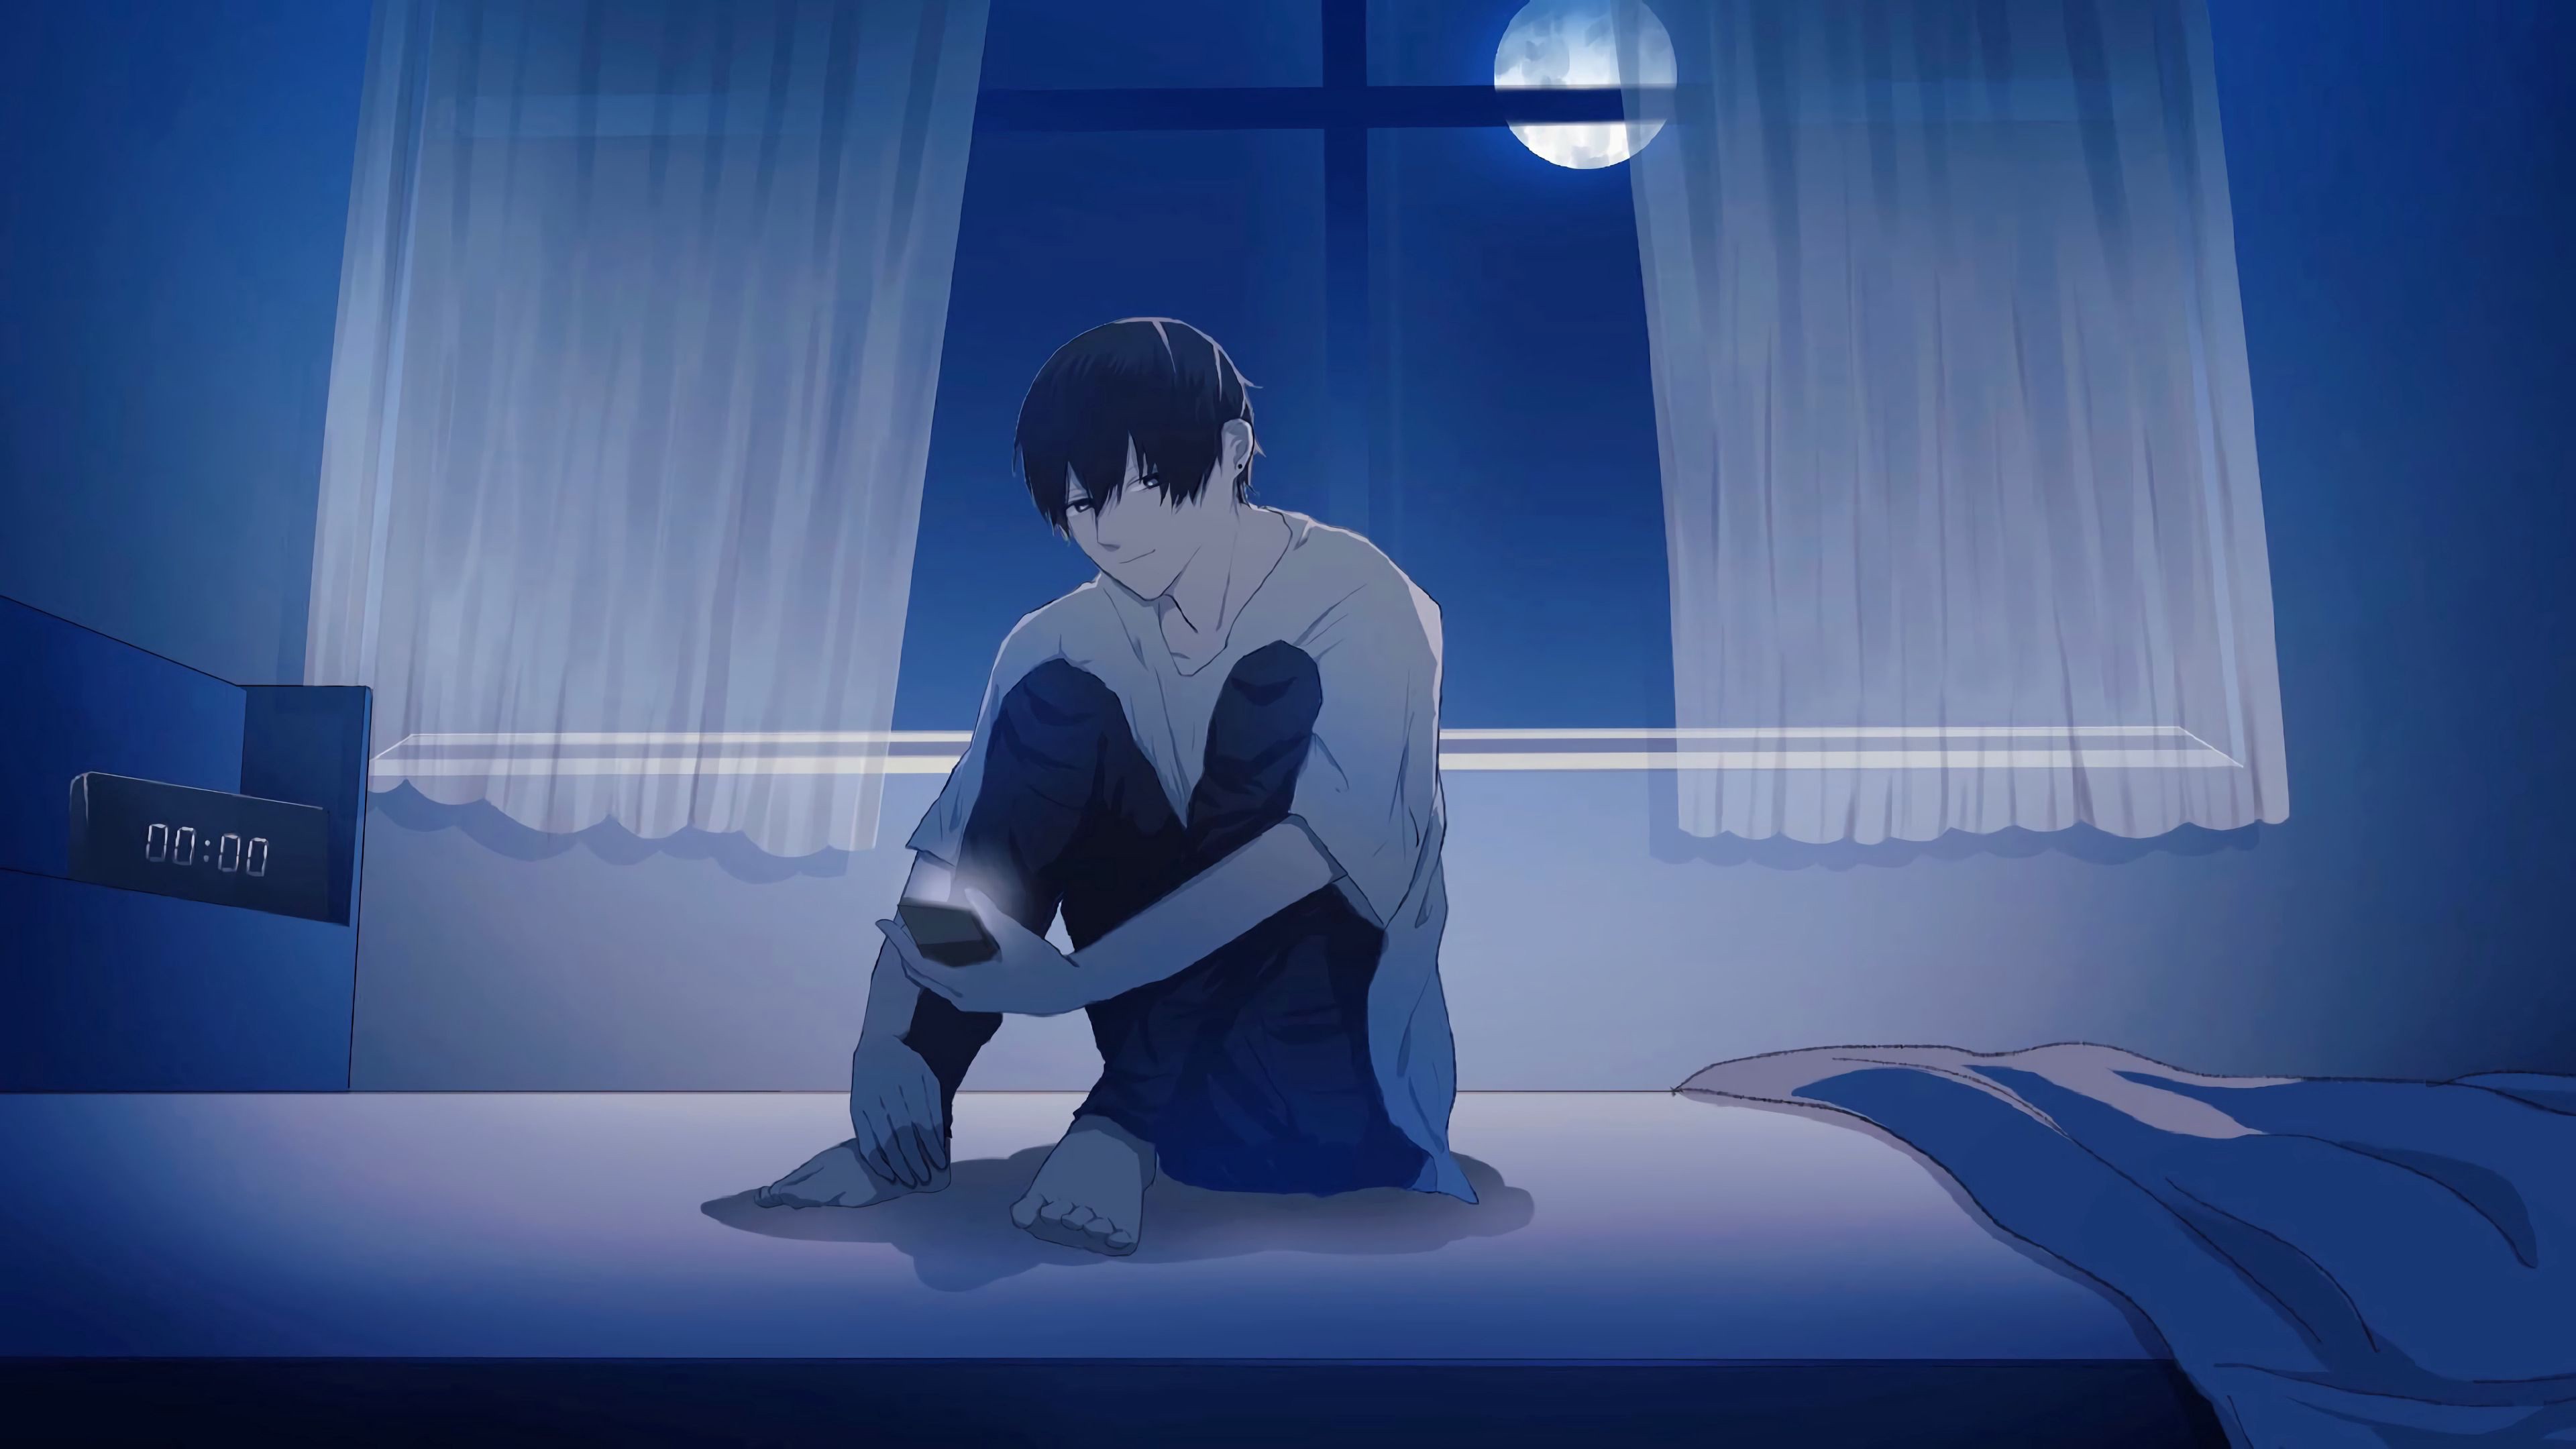 Boy Is Sitting Alone On Bed During Nighttime 4K HD Anime Boy Wallpaper